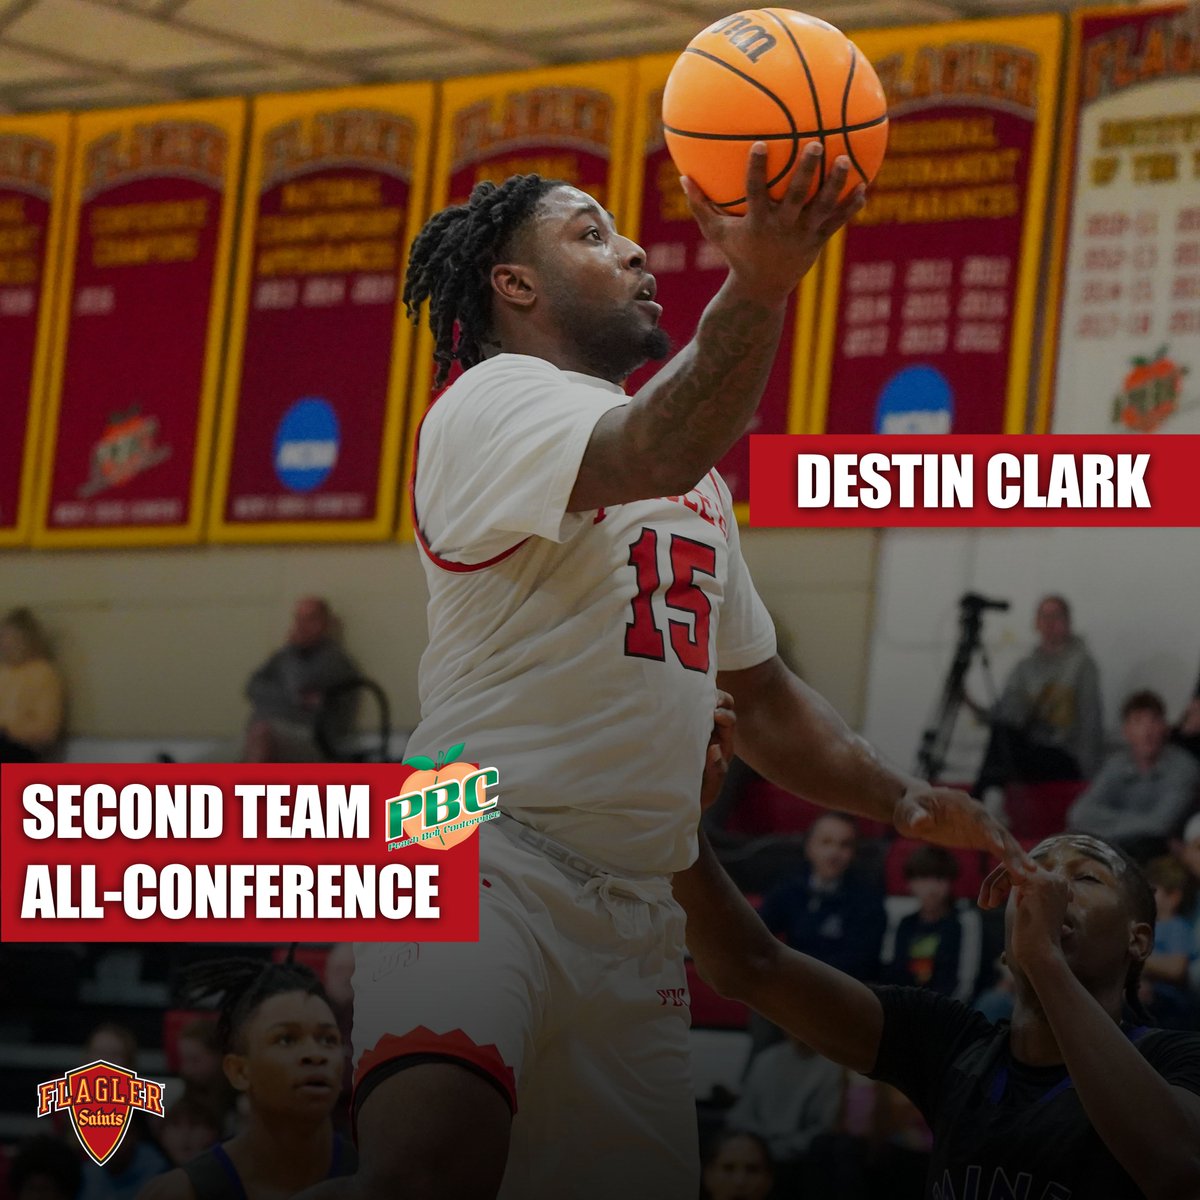 Jalen Barr is the @PeachBelt Defensive Player of the Year🔥 Malik Bryant and Destin Clark were named to the PBC All-Conference Team👏 #GoSaints | @FlaglerMBB 🏀